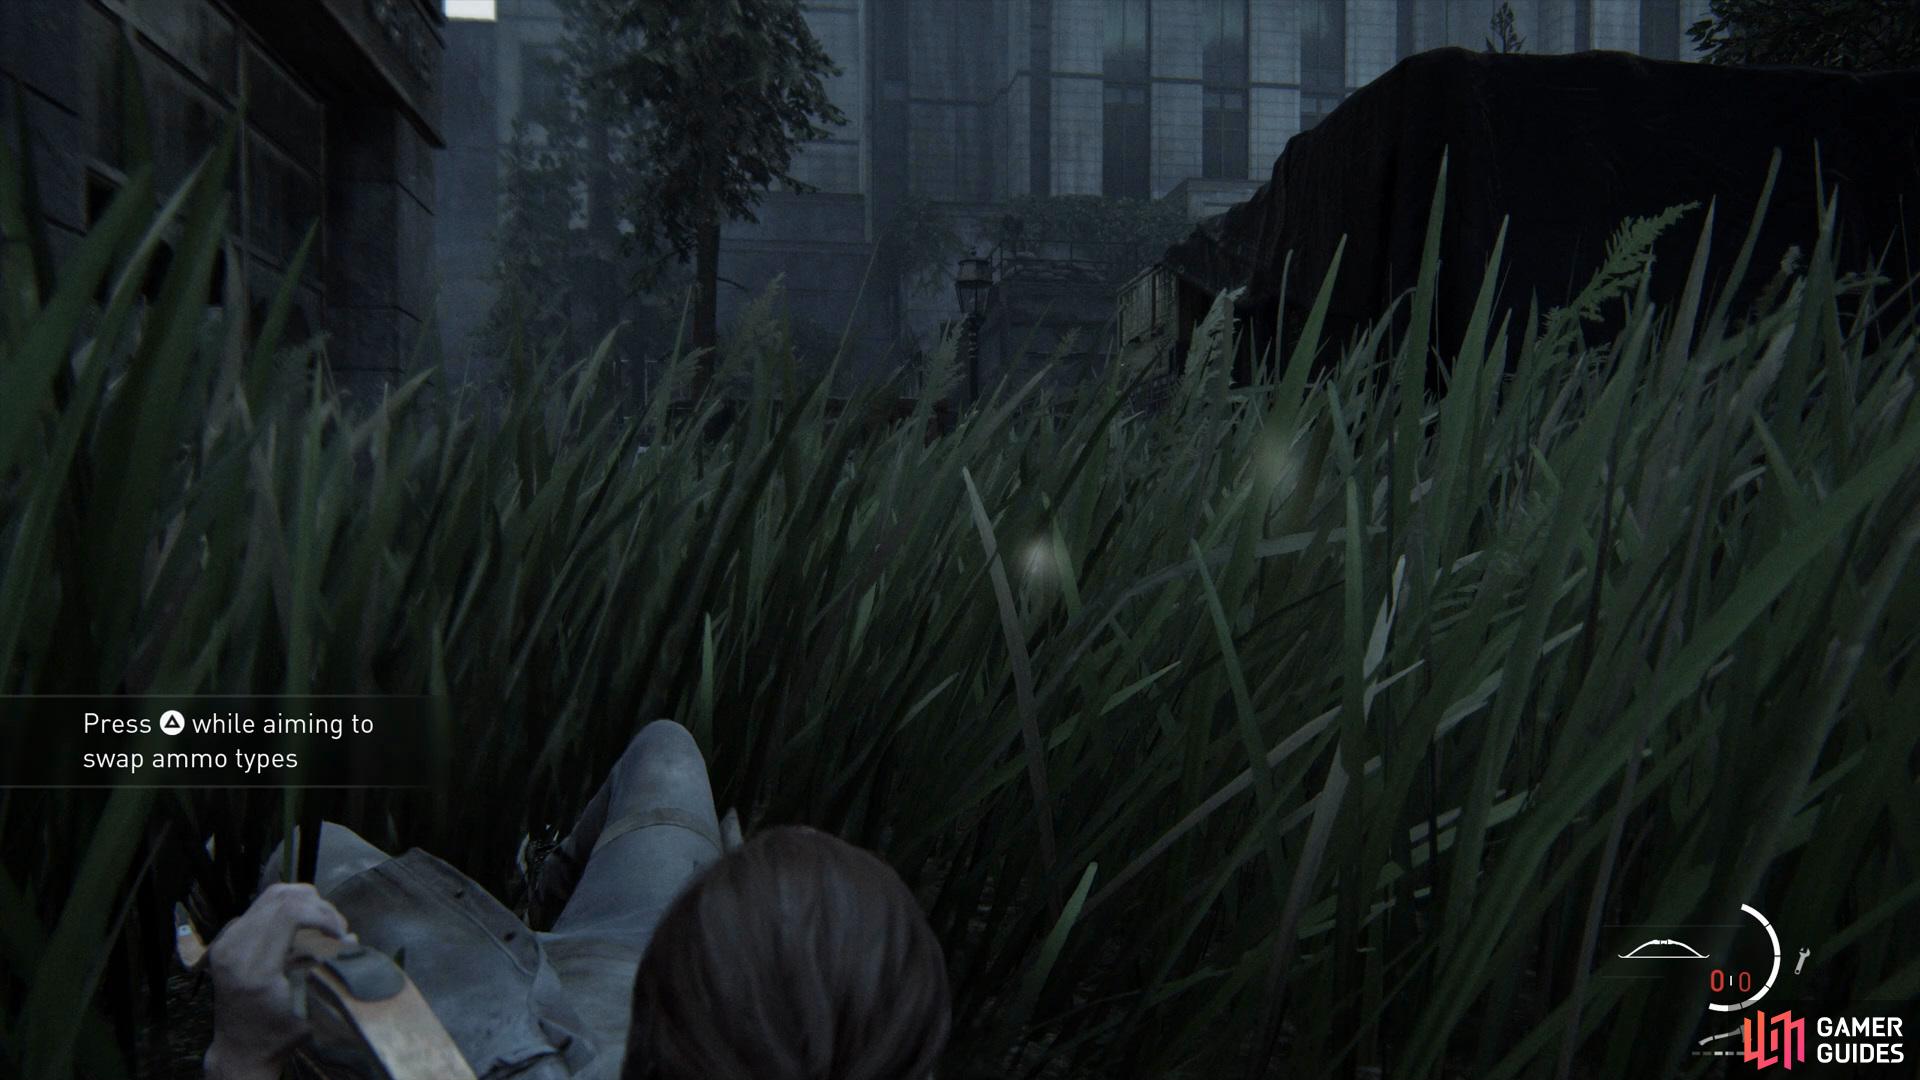 Crawl through the grass to take out the enemies